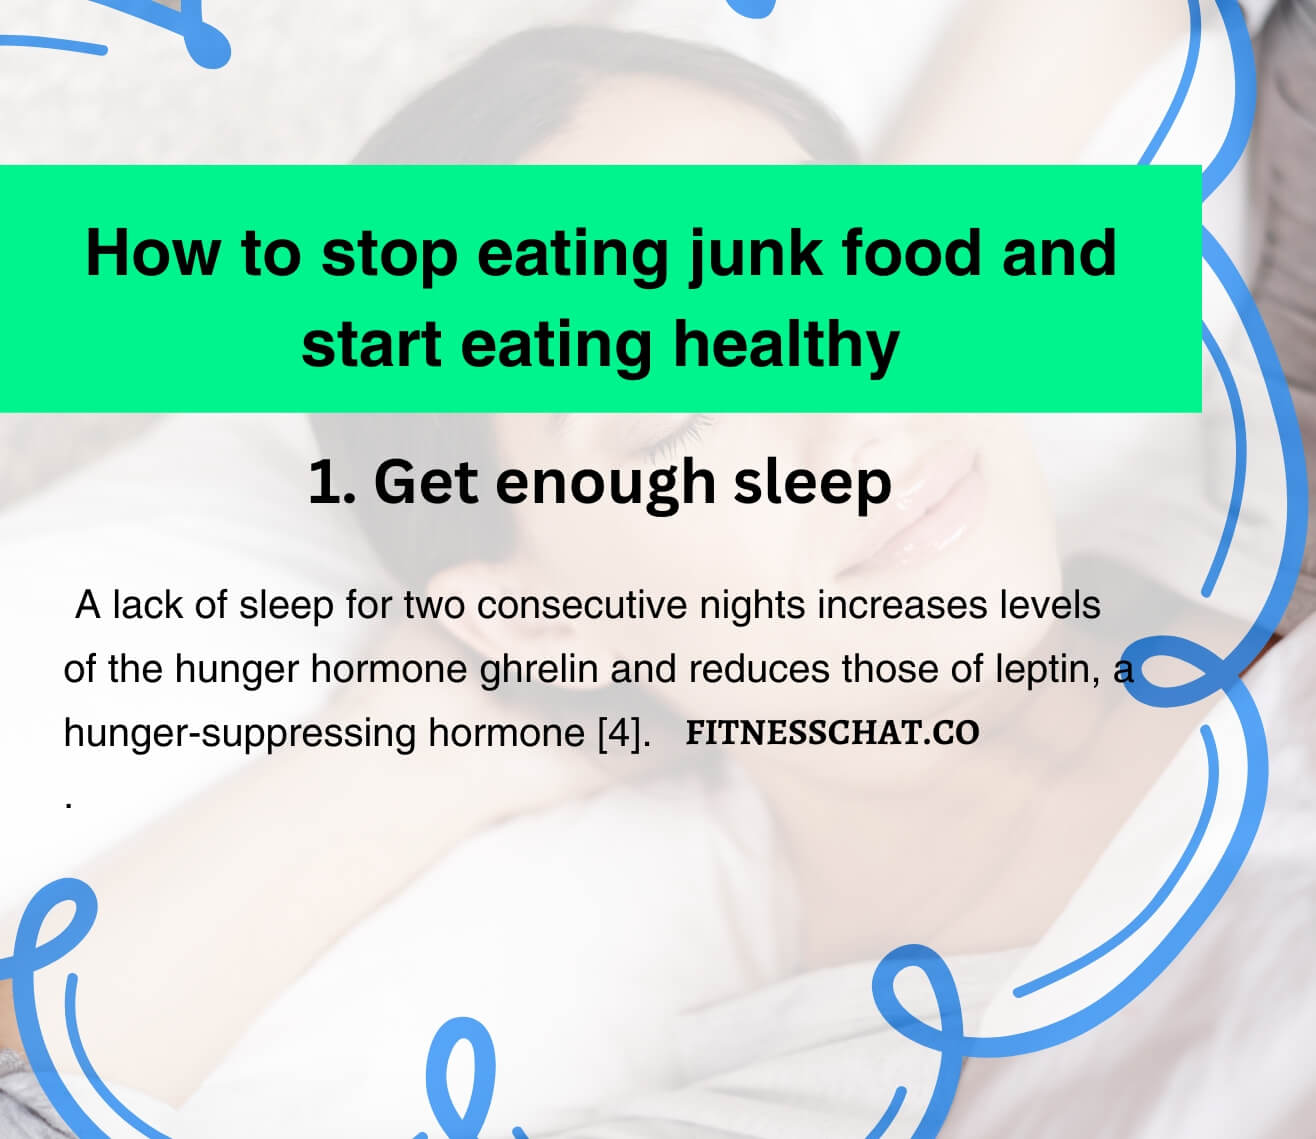 how to stop eating junk food and start eating healthy